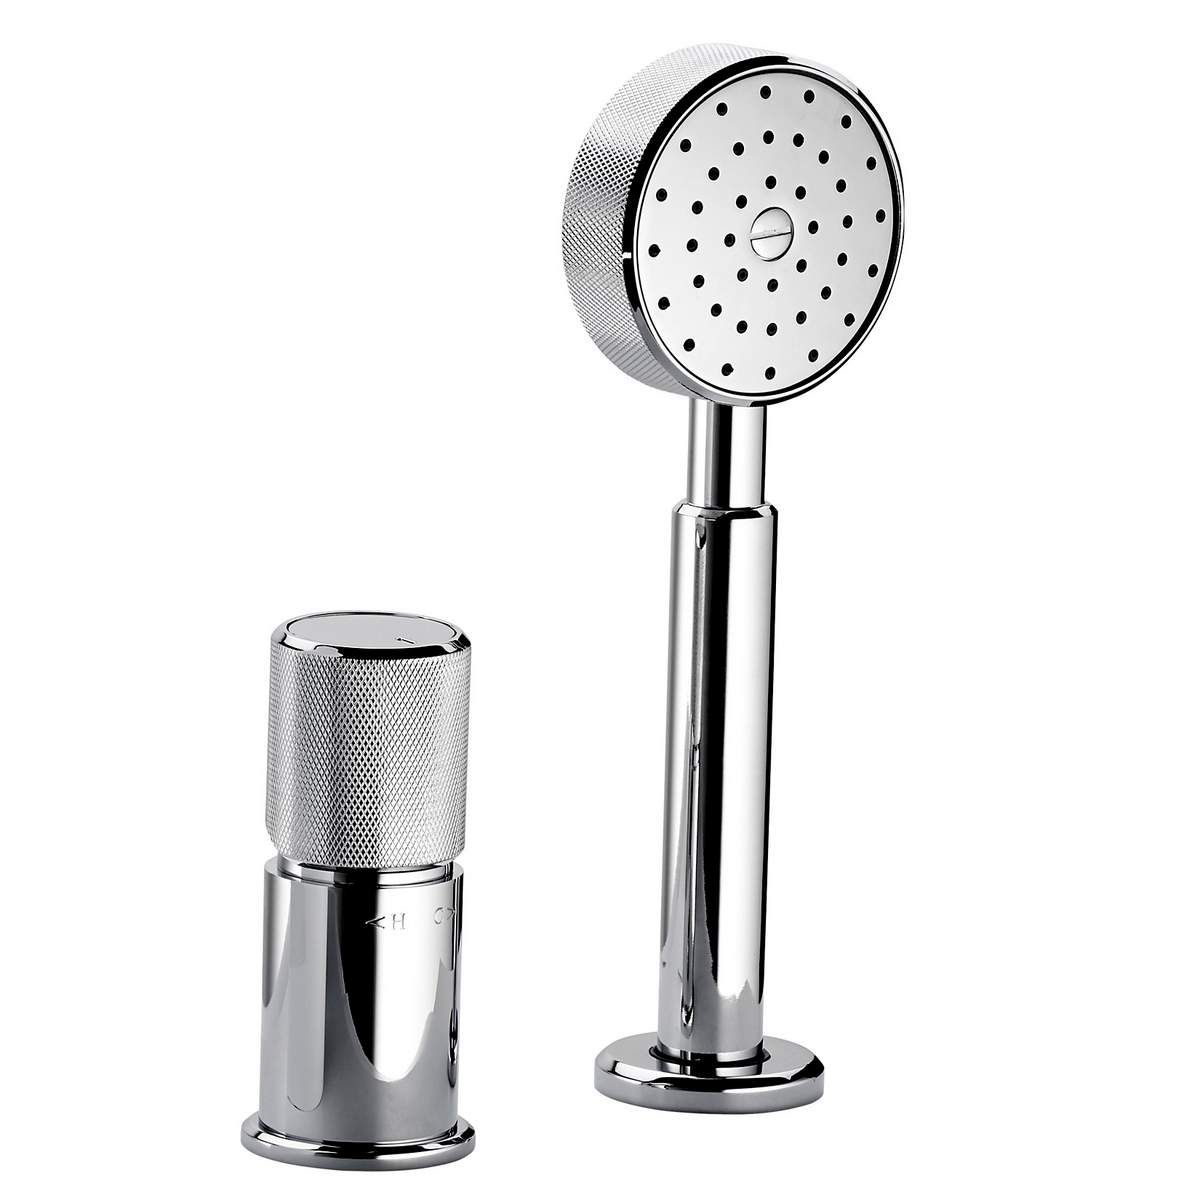 Swadling Engineer Bath Mounted Hand Shower with Mixer Valve